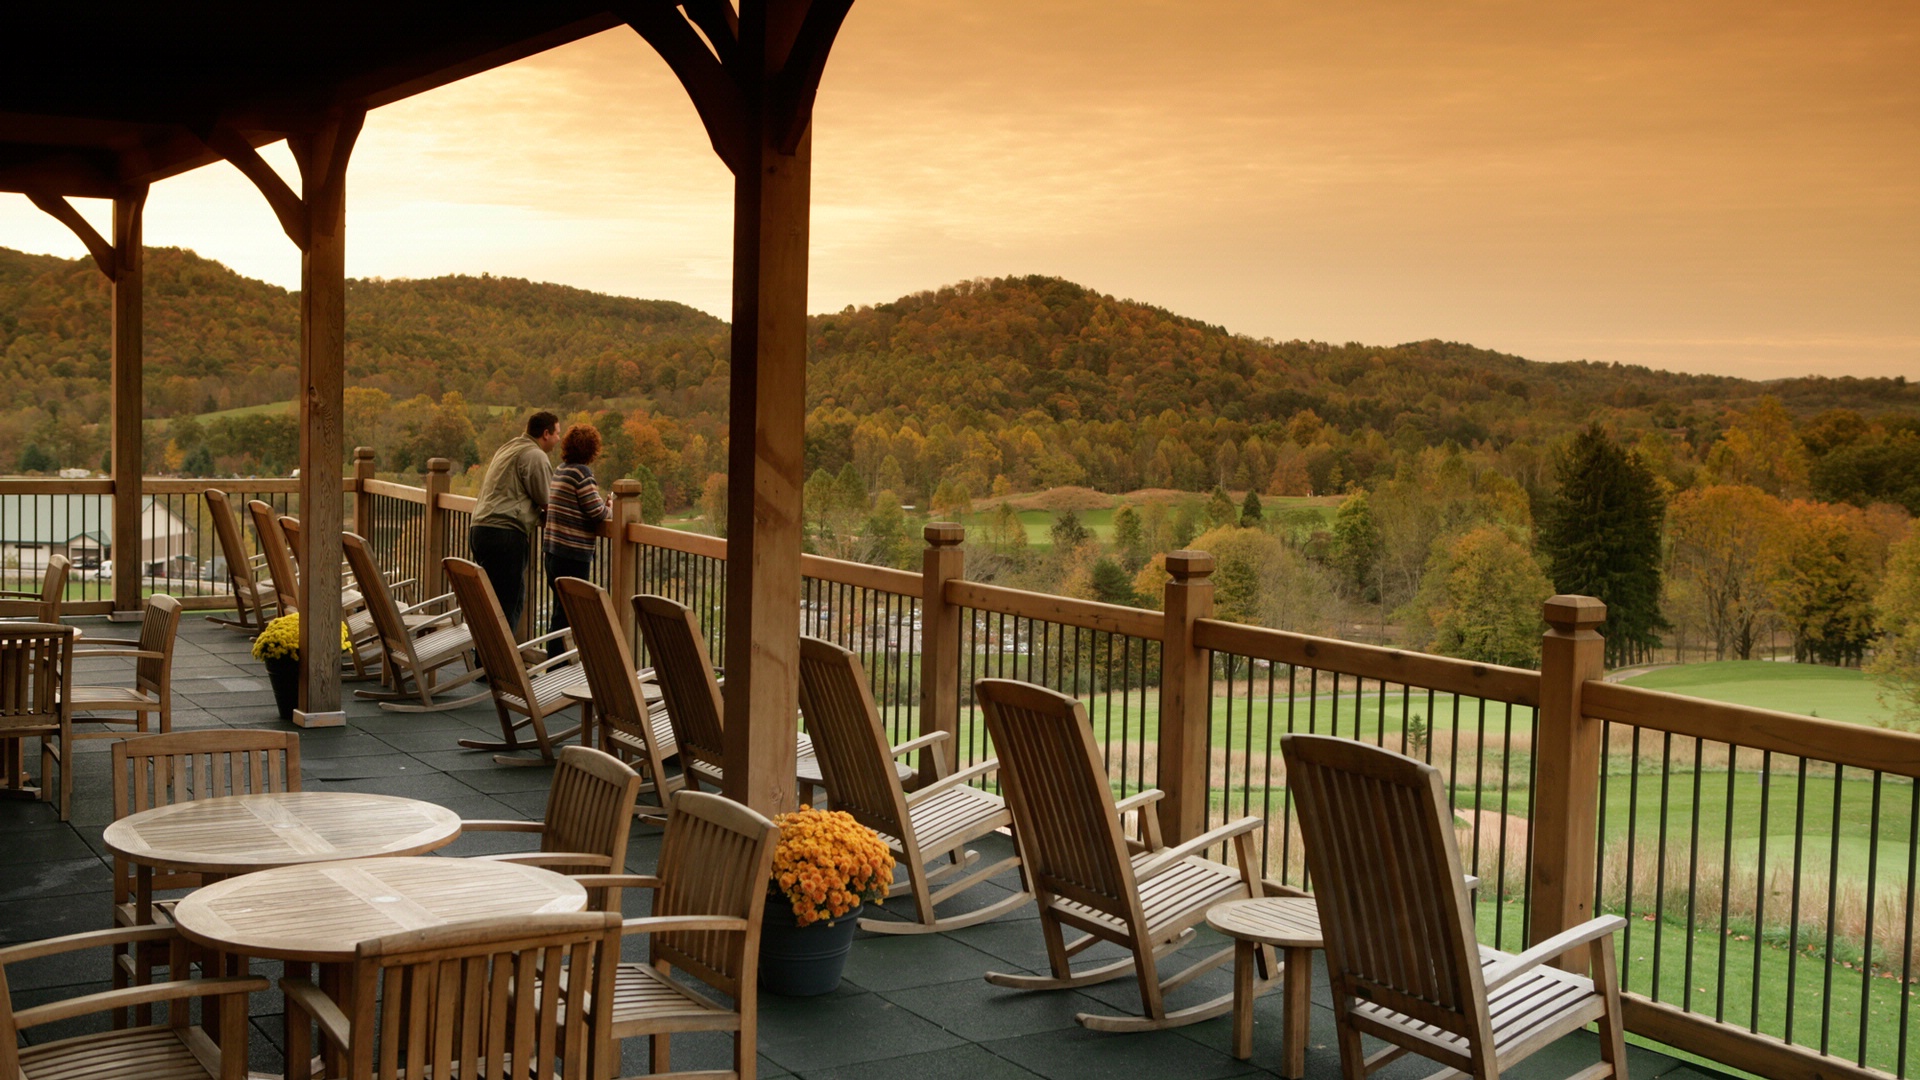 About Stonewall Resort in West Virginia Benchmark 